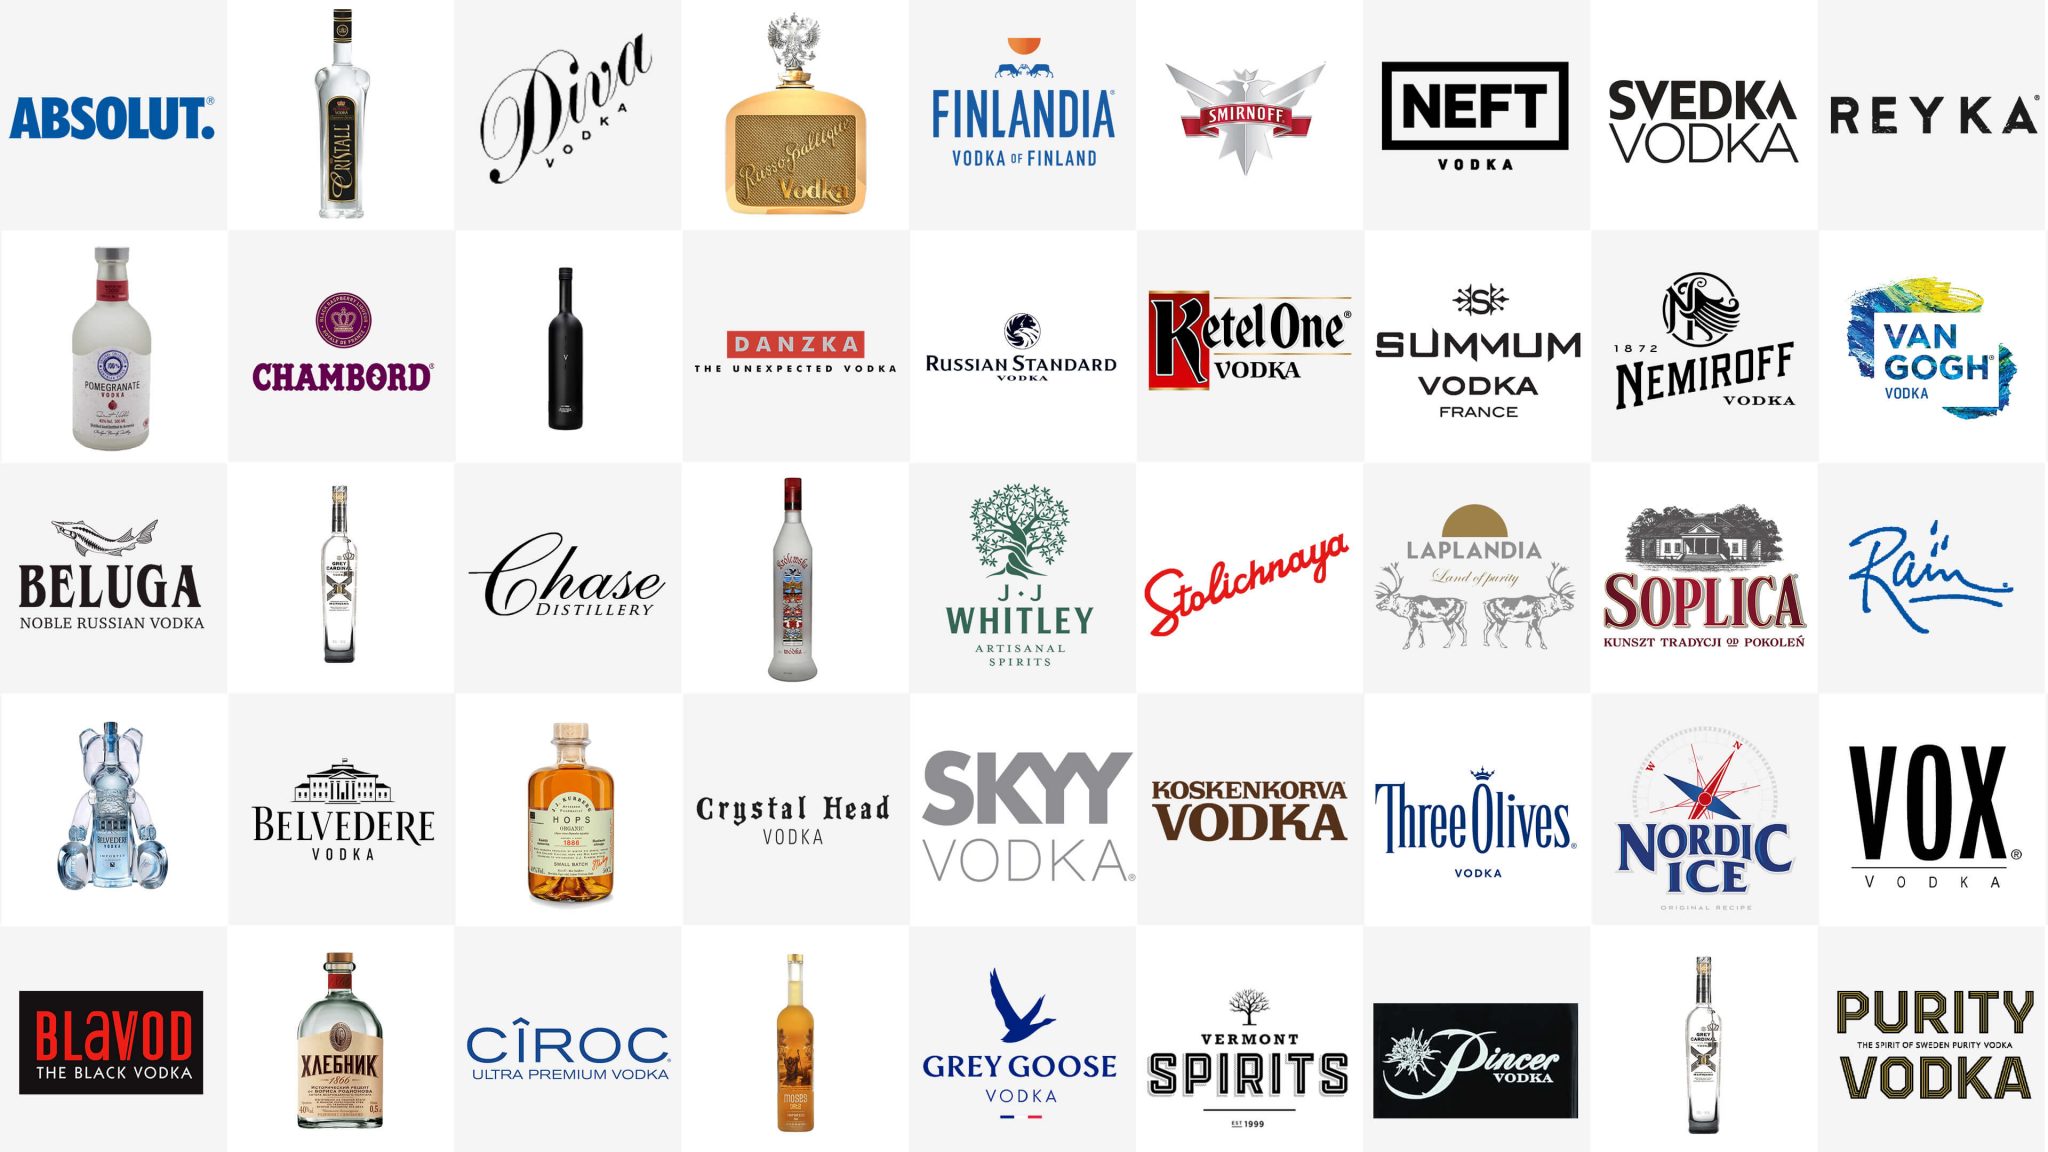 The 44 World s Best Vodka Brands and Logos